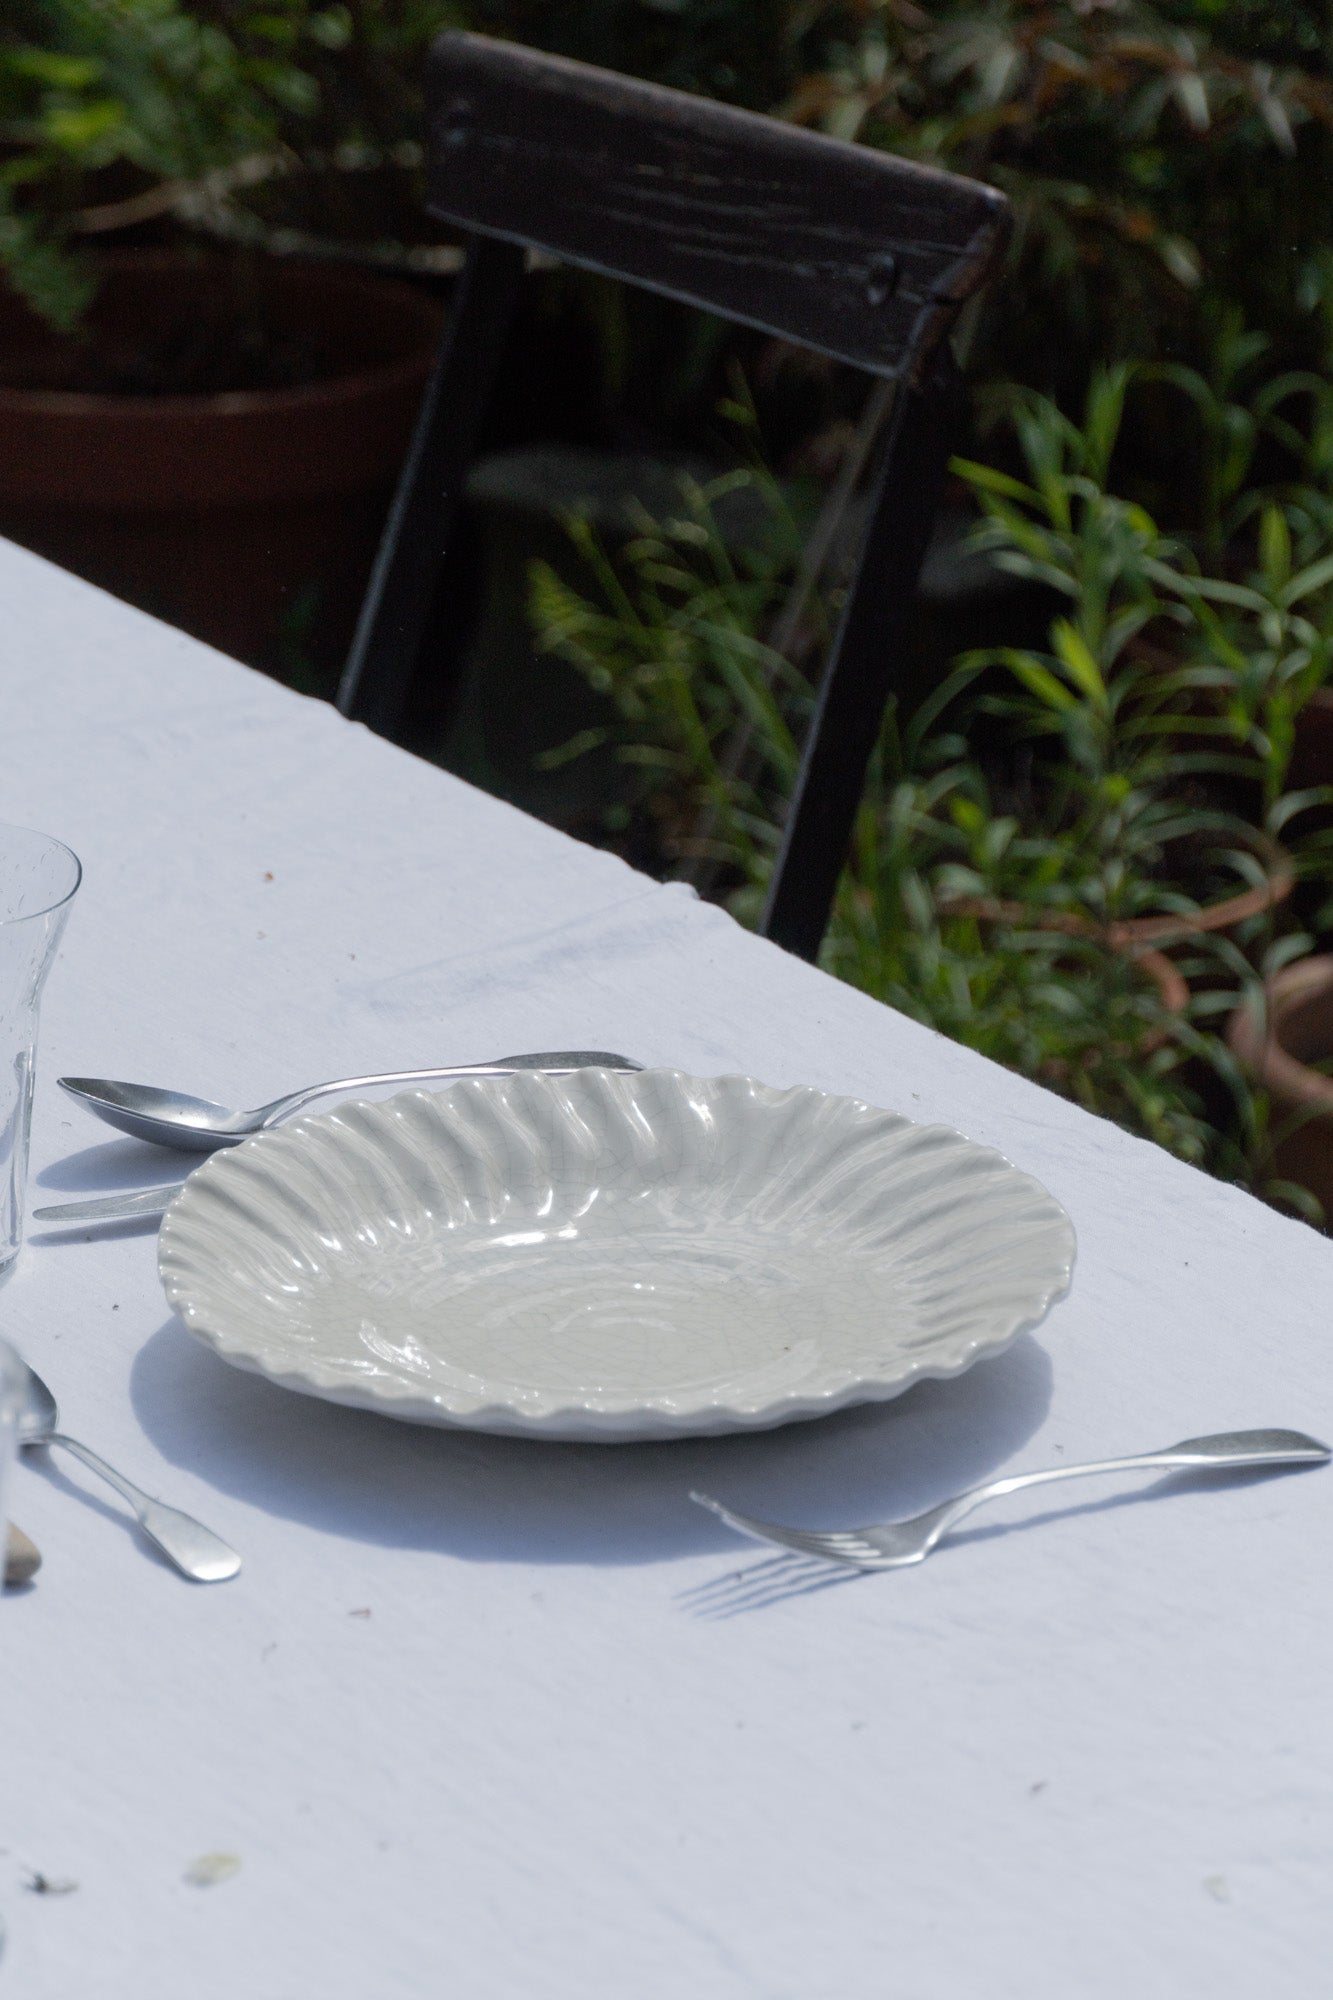 White Crackled Glaze Dashi Plate on table outdoors.